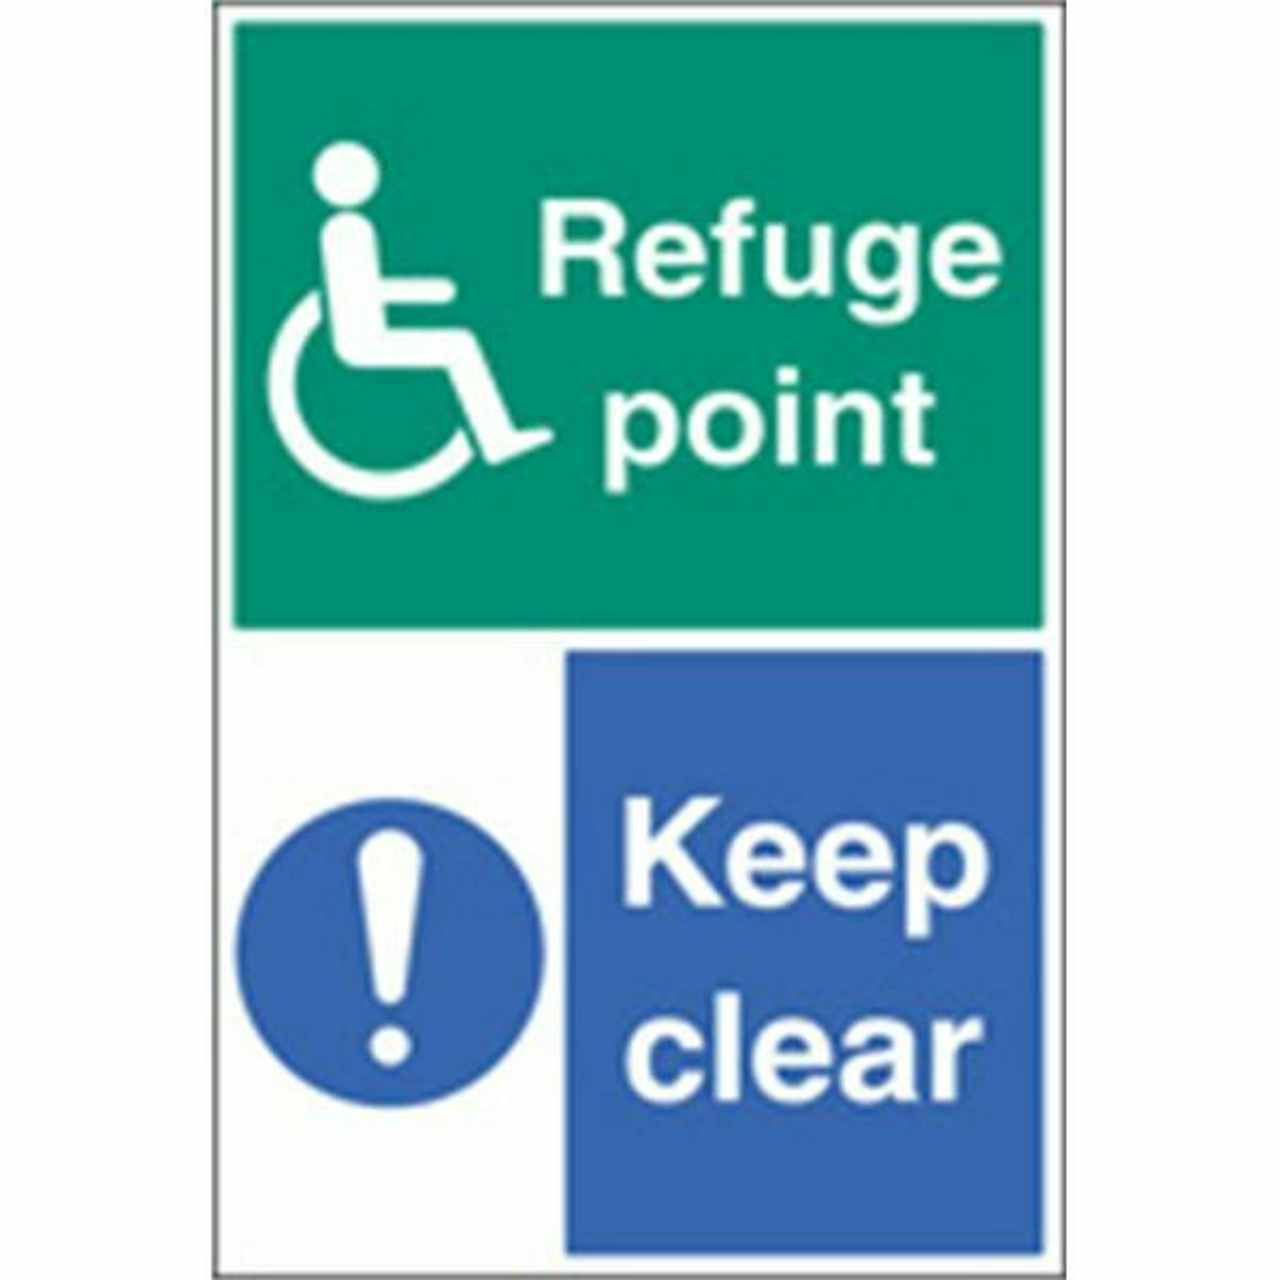 Refuge point keep clear floor safety sign